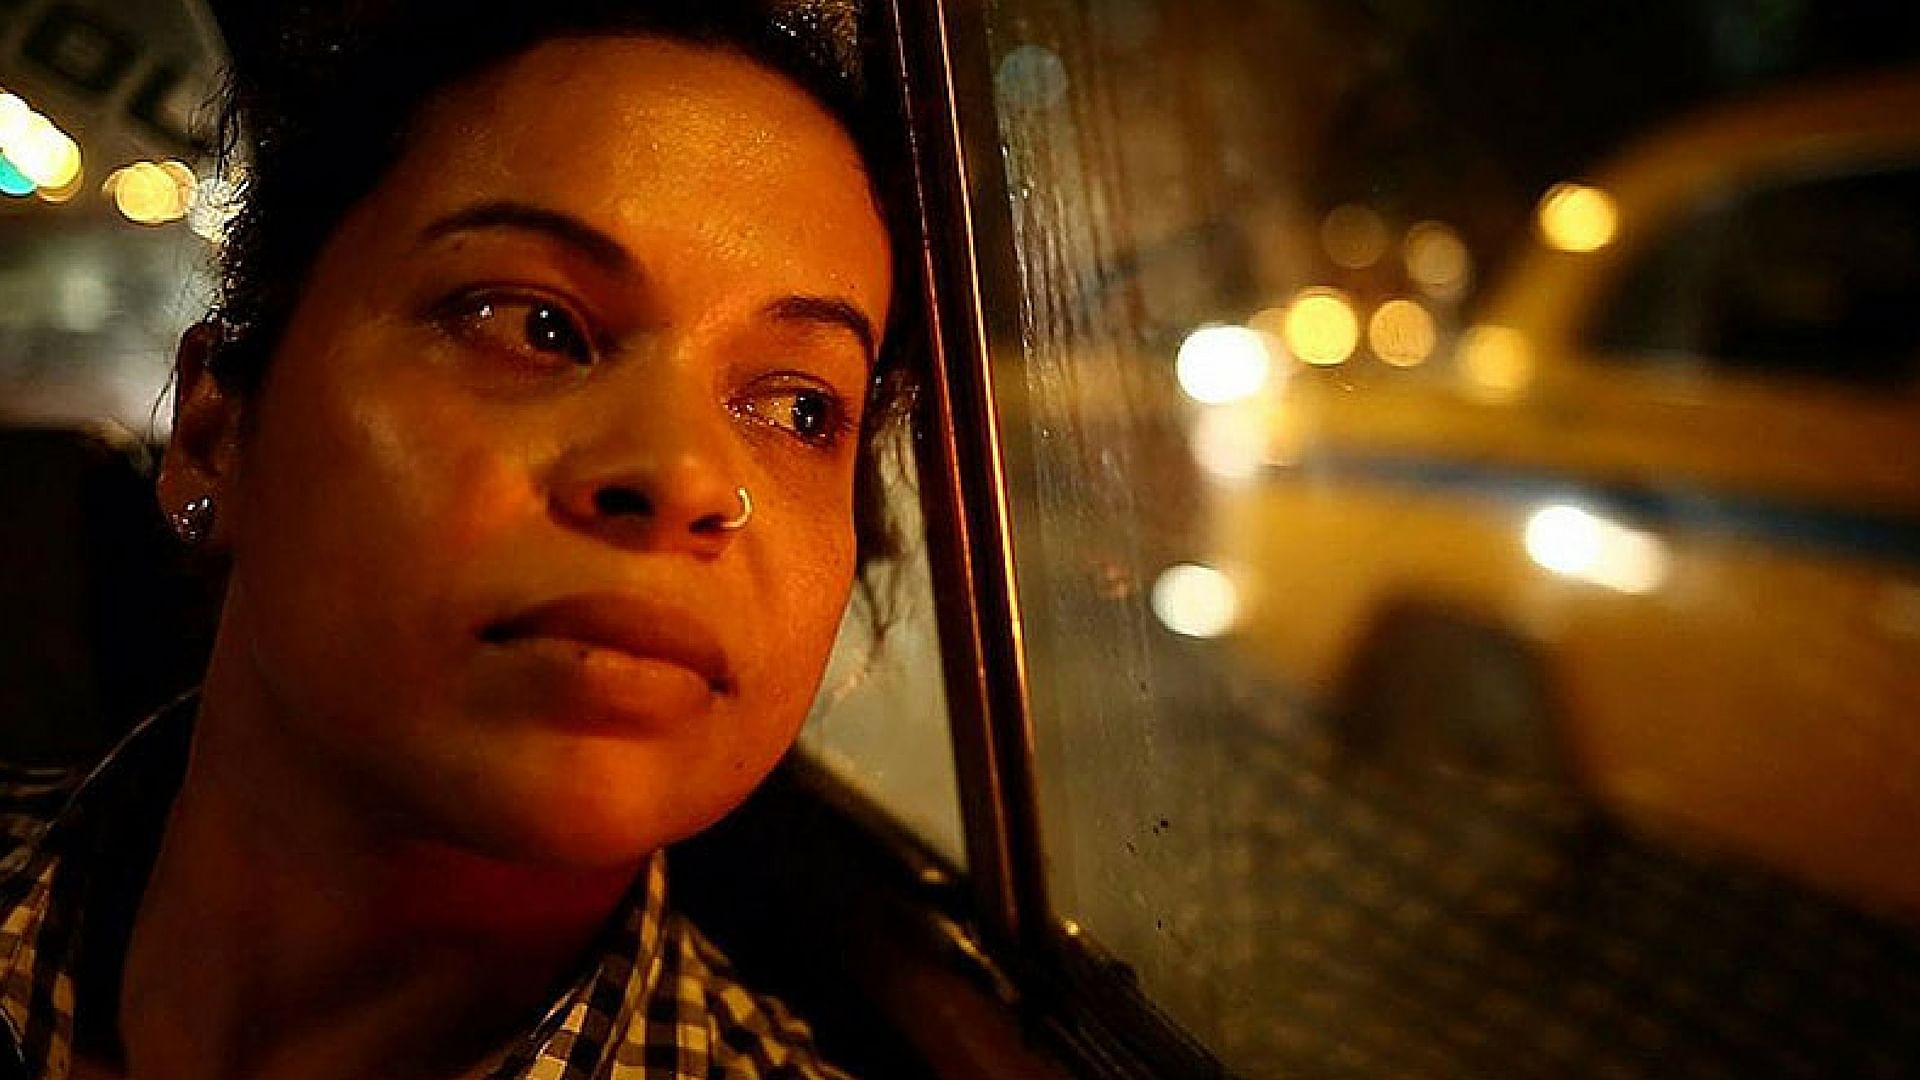 Remembering the life and courage of Suzette Jordan, the survivor of a brutal rape and mother of two daughters (Photo: Twitter)